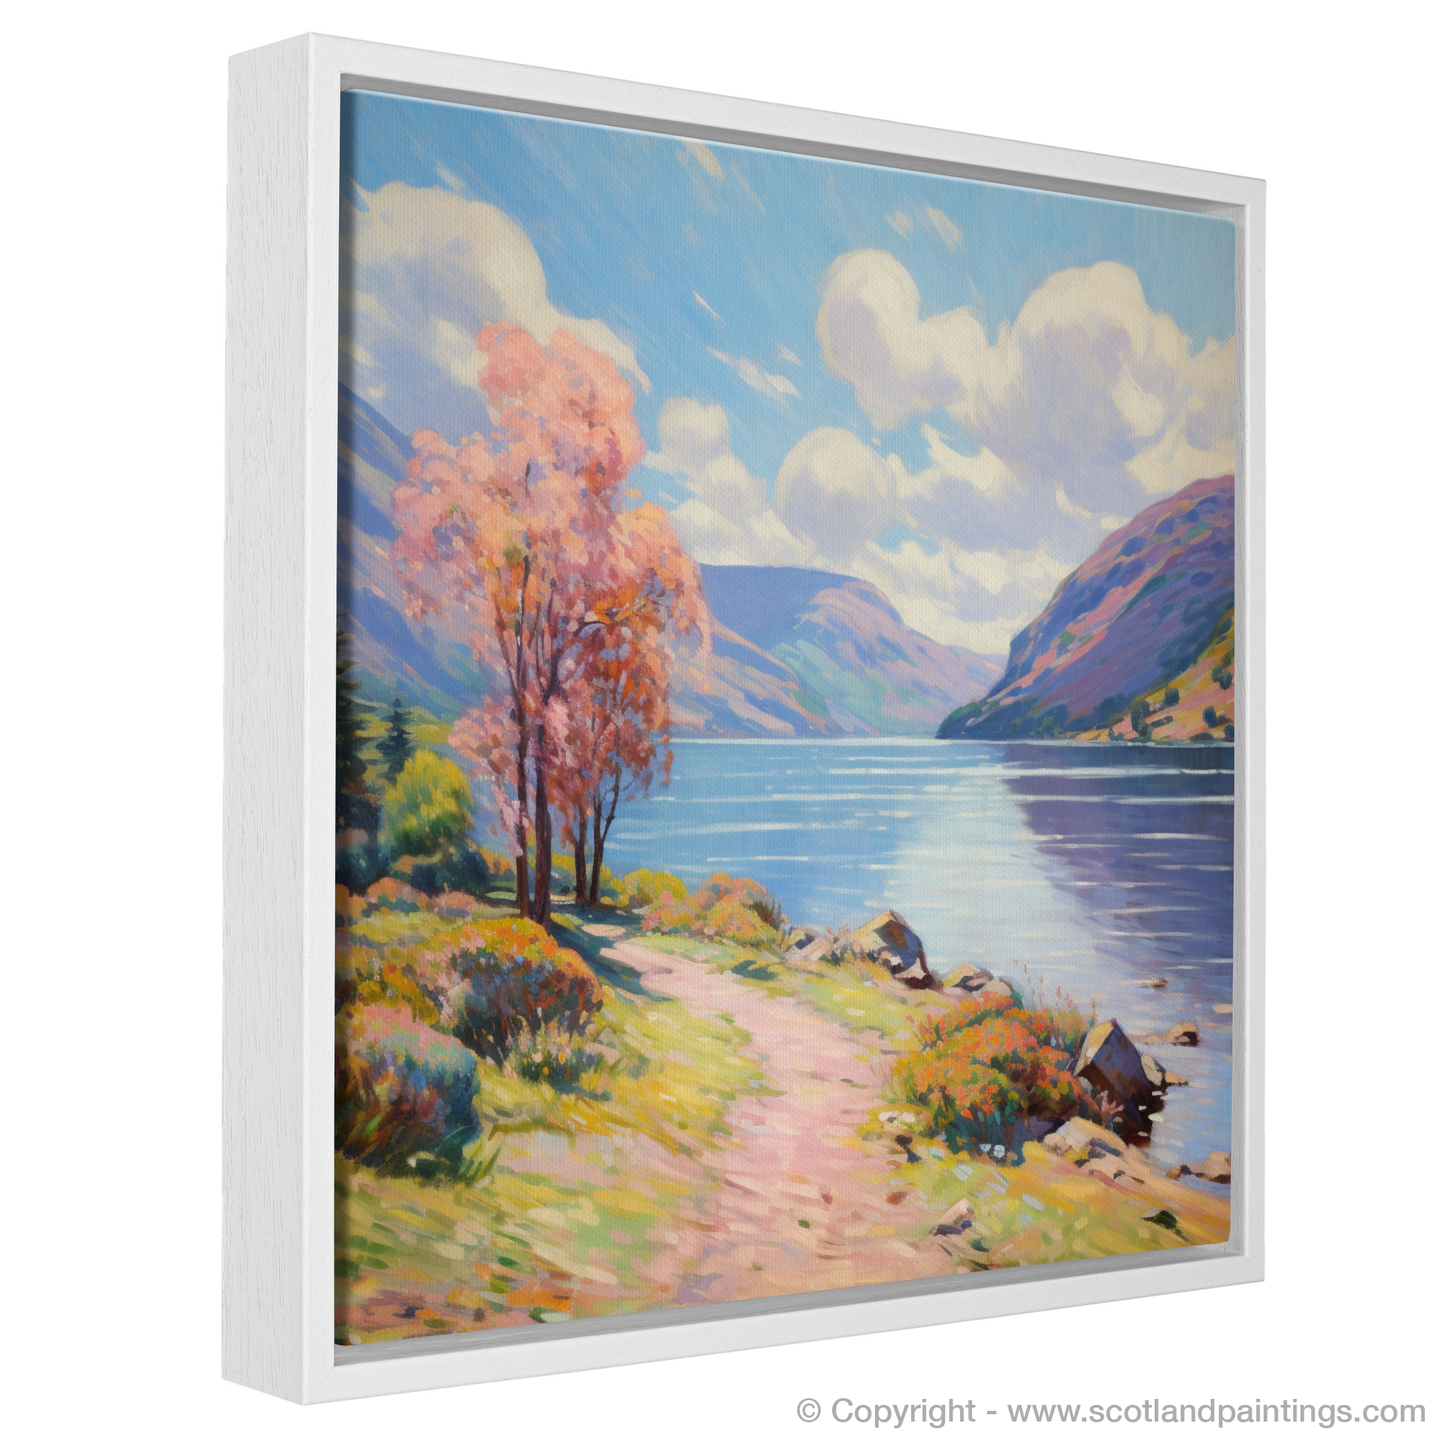 Painting and Art Print of Loch Earn, Perth and Kinross in summer entitled "Summer Serenity at Loch Earn: An Impressionist's View".